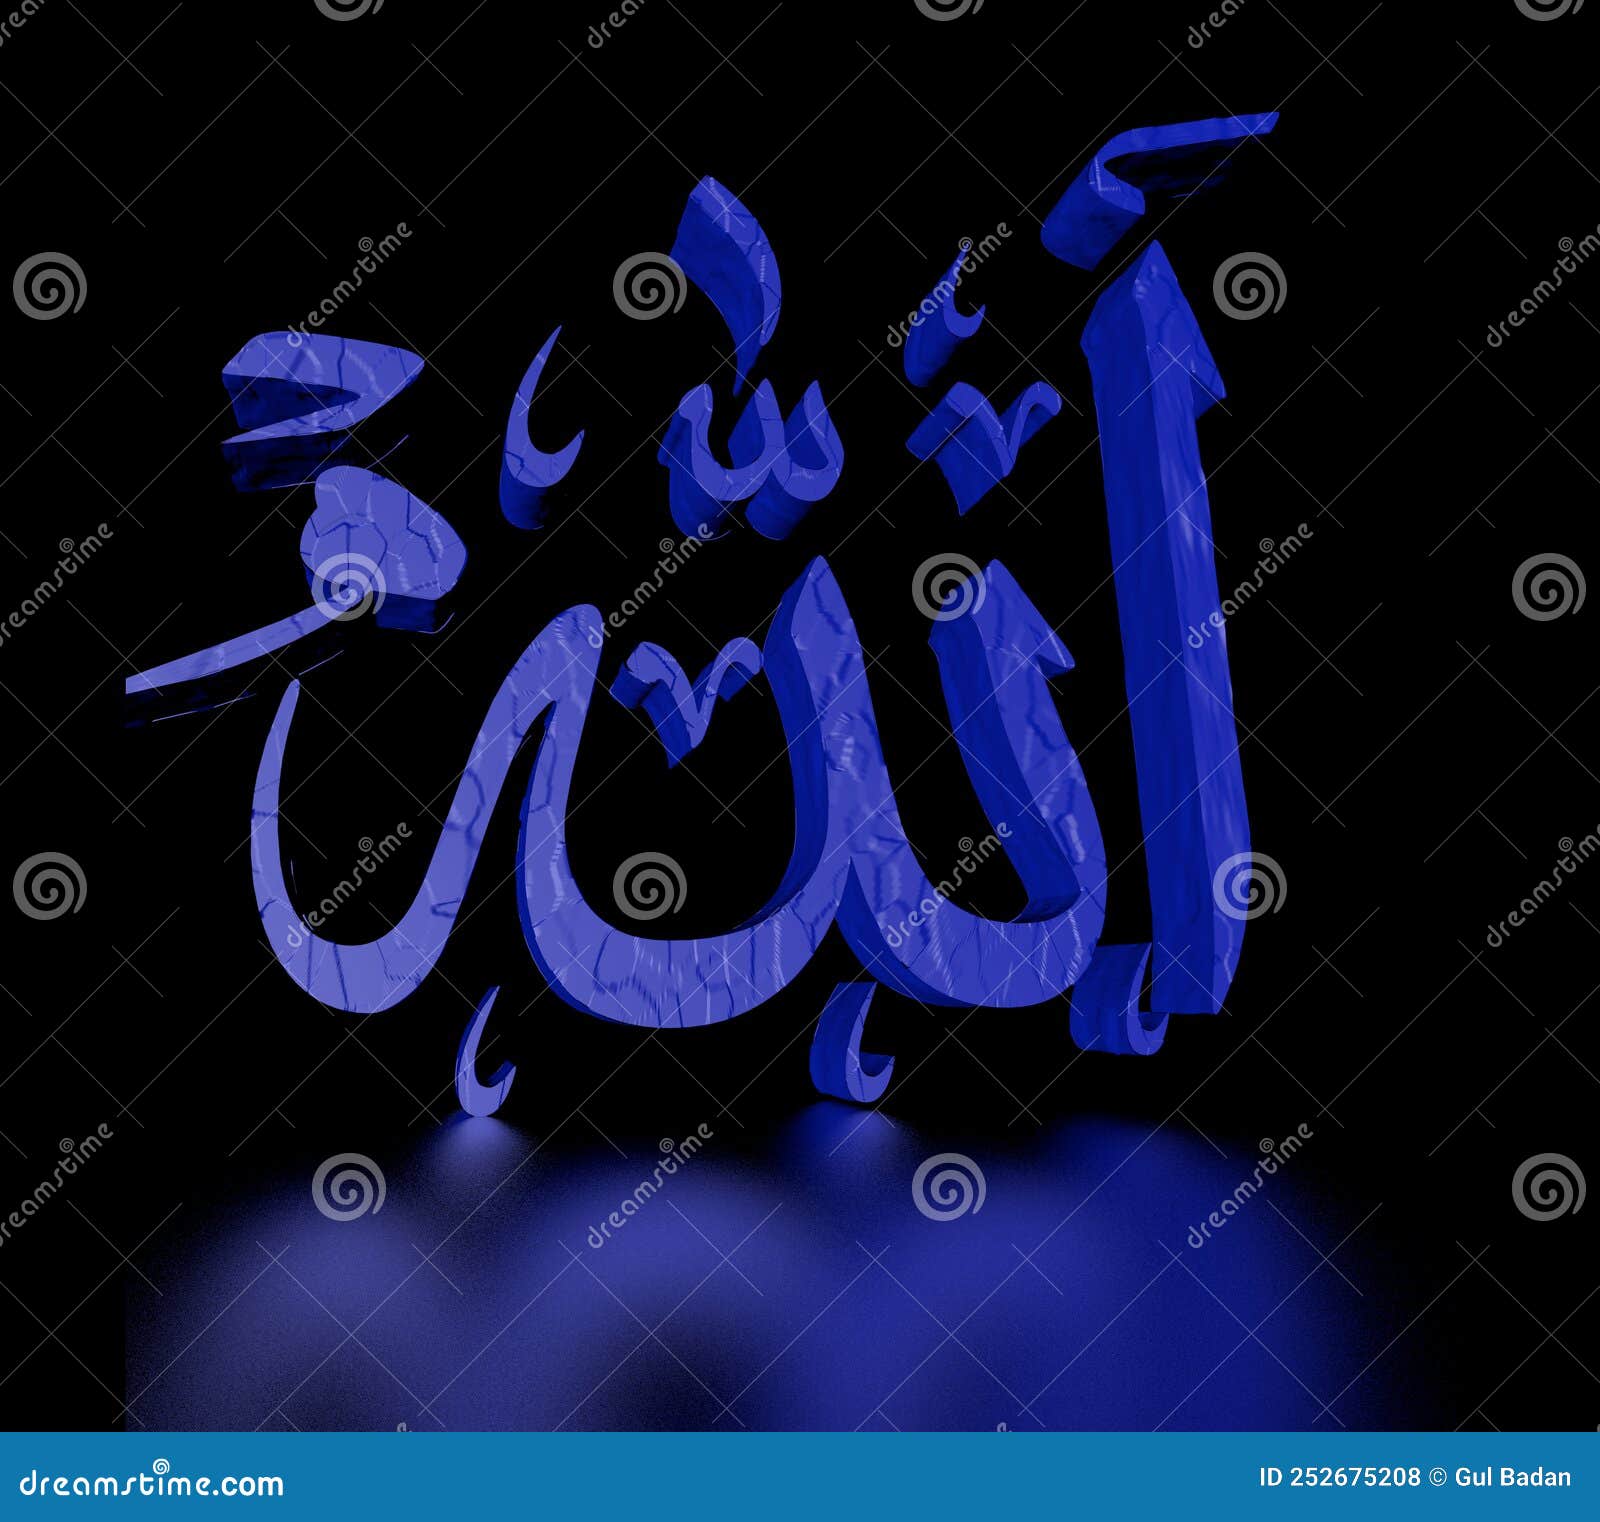 Abstract 3D Rendering Illustration Name of Allah Muslim S God on Black Background  Wallpaper Stock Illustration - Illustration of muslim, wallpaper: 252675208